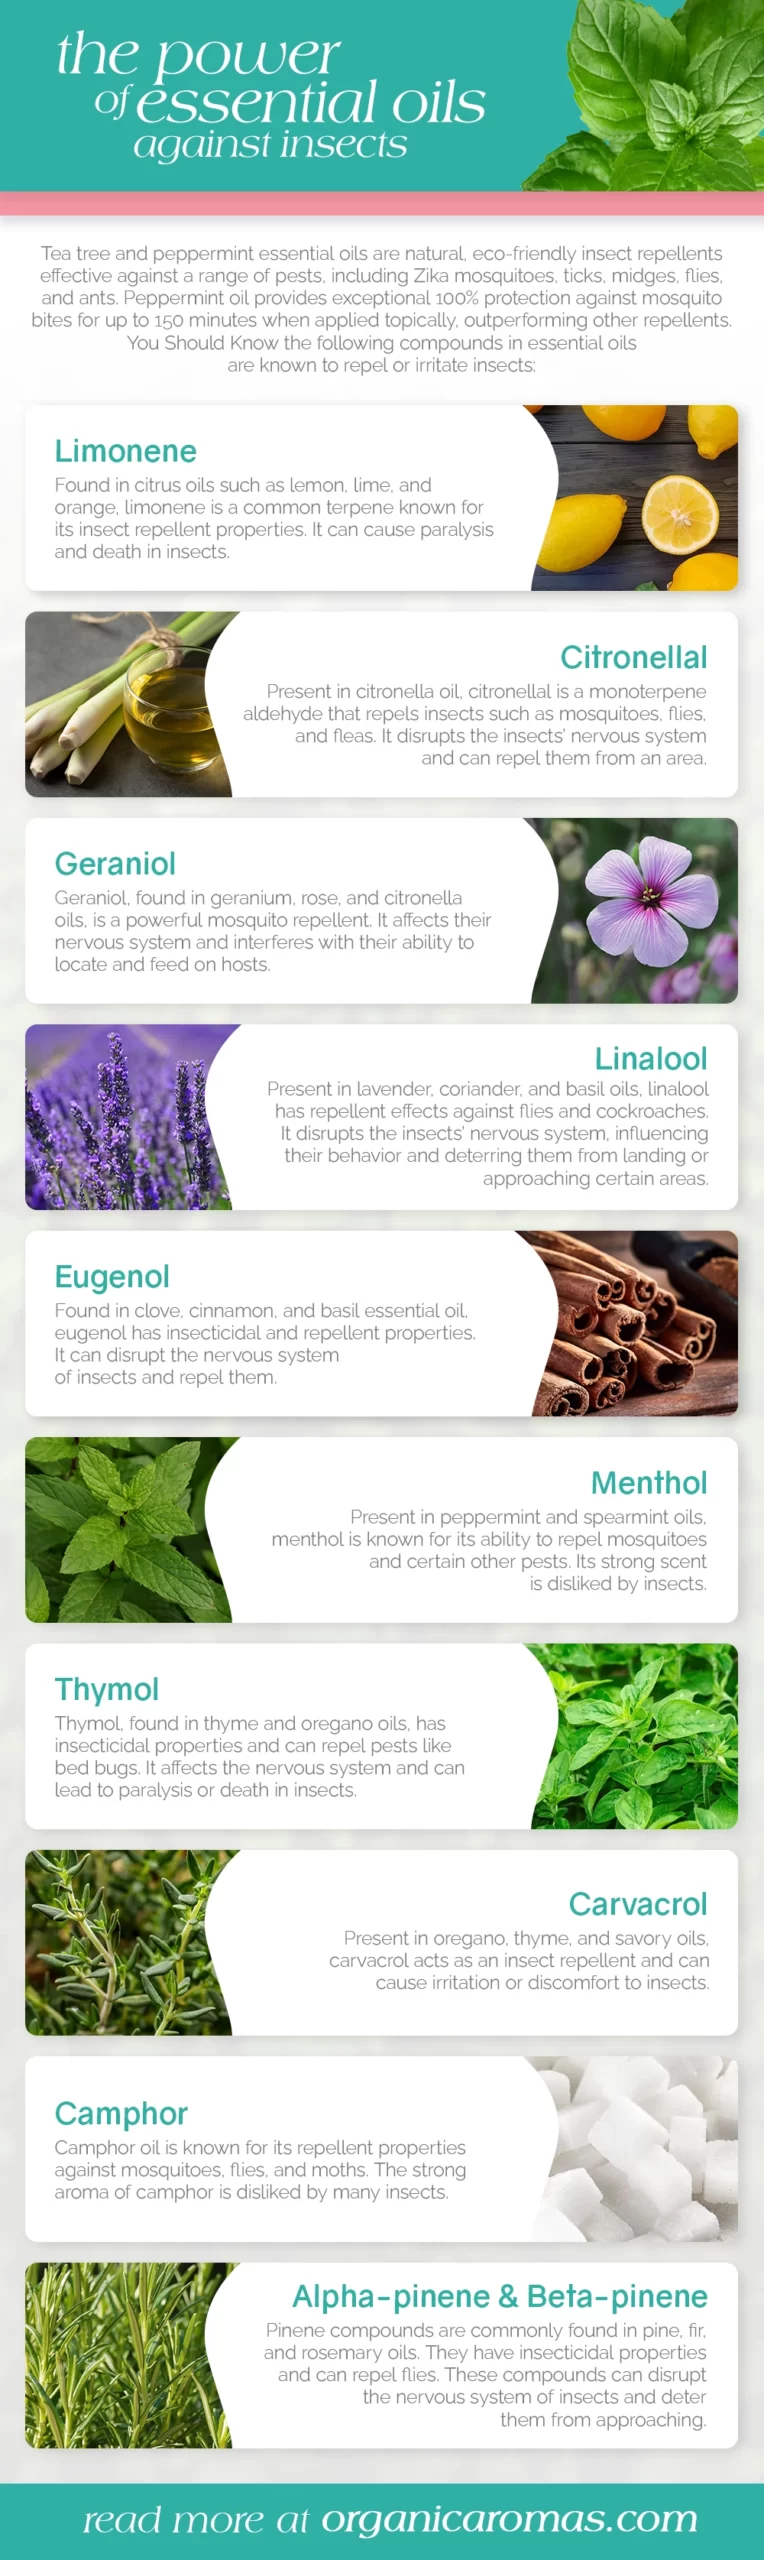 Essential Oils That Repel Mosquitoes and How To Use Them